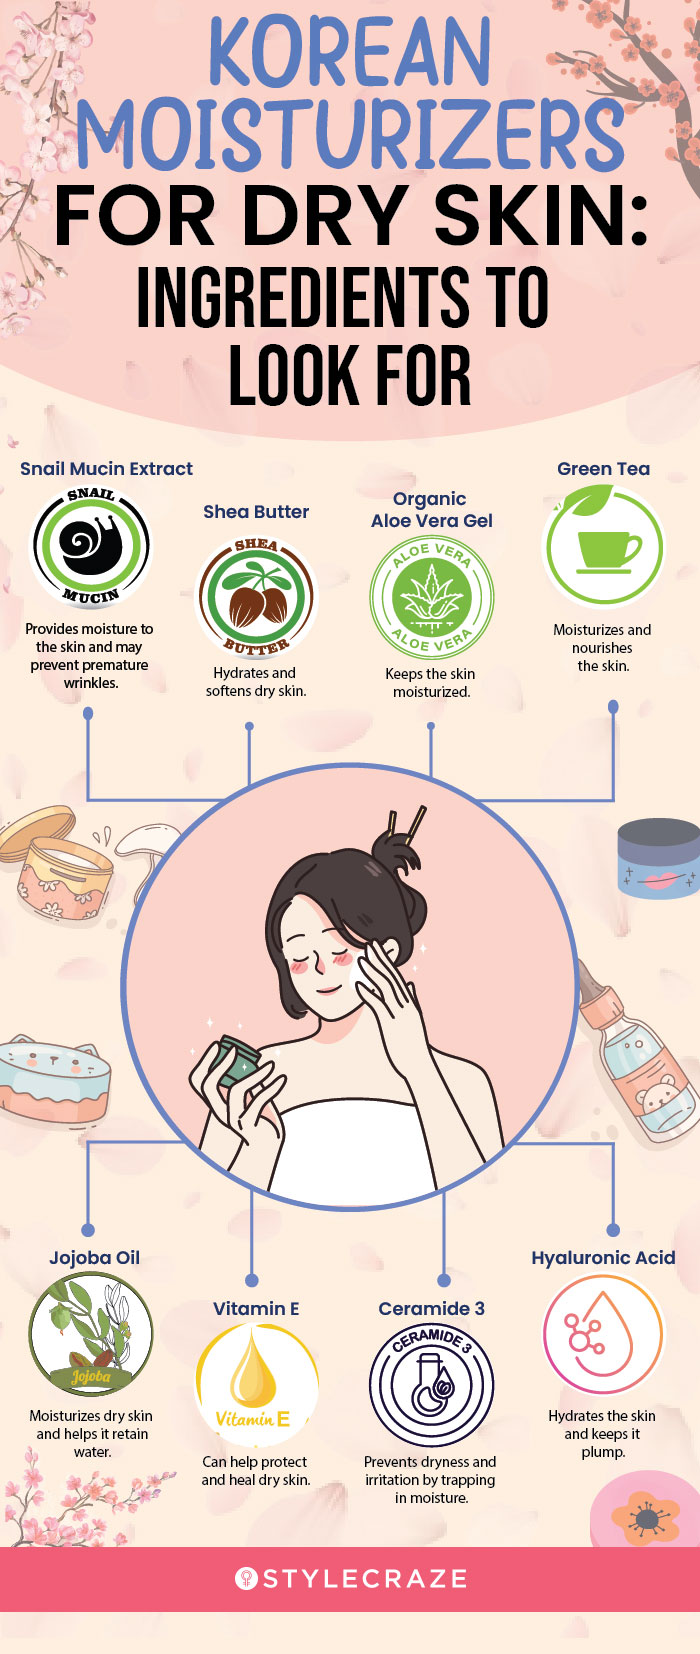 Korean Moisturizers For Dry Skin: Ingredients To Look For (infographic)